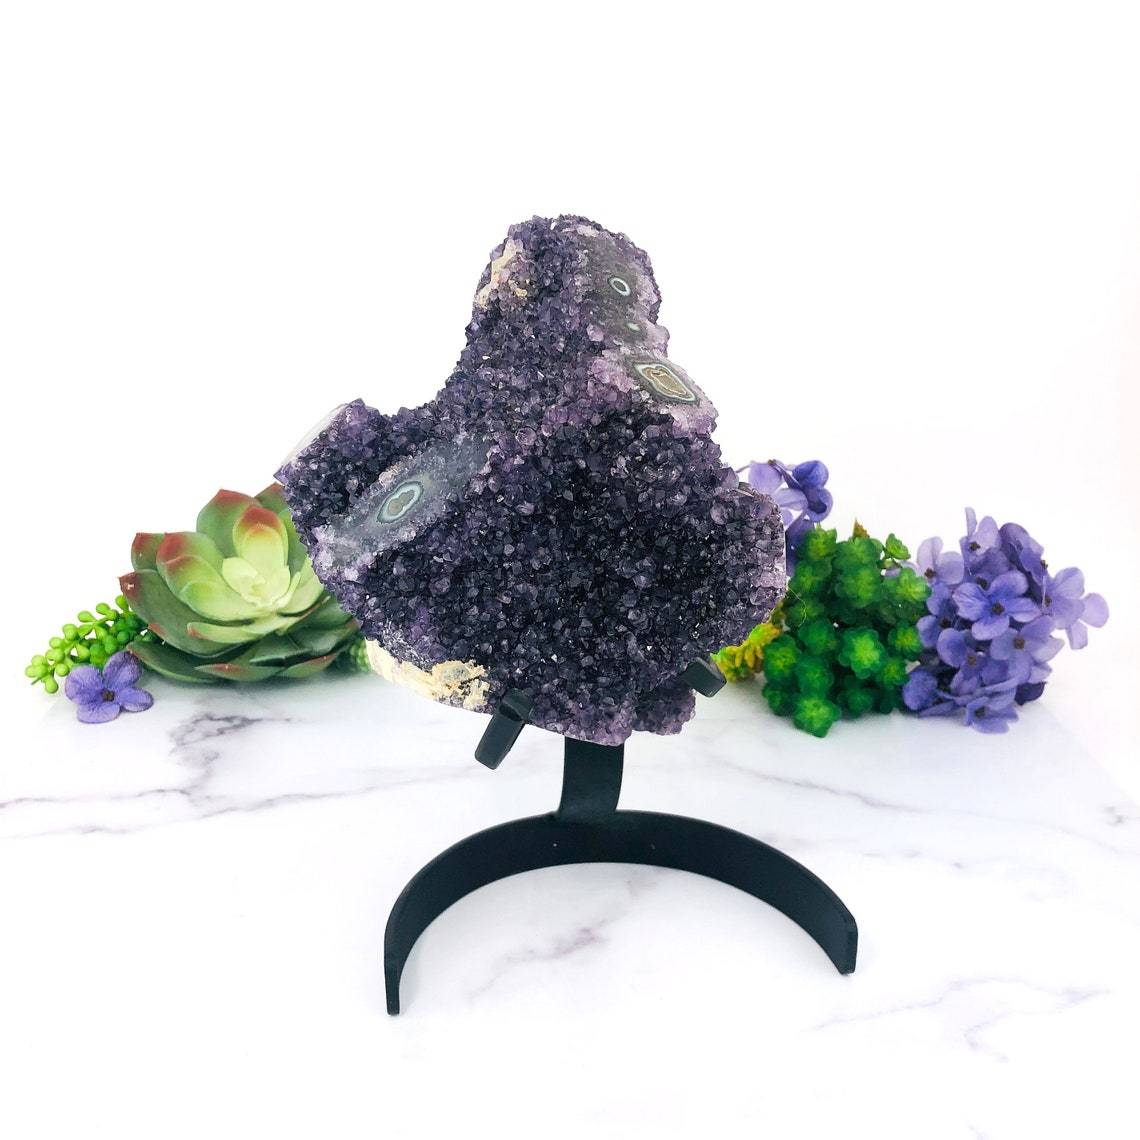 Amethyst Purple Geode Crystal With Stalactite on Metal Stand with decorations in the background